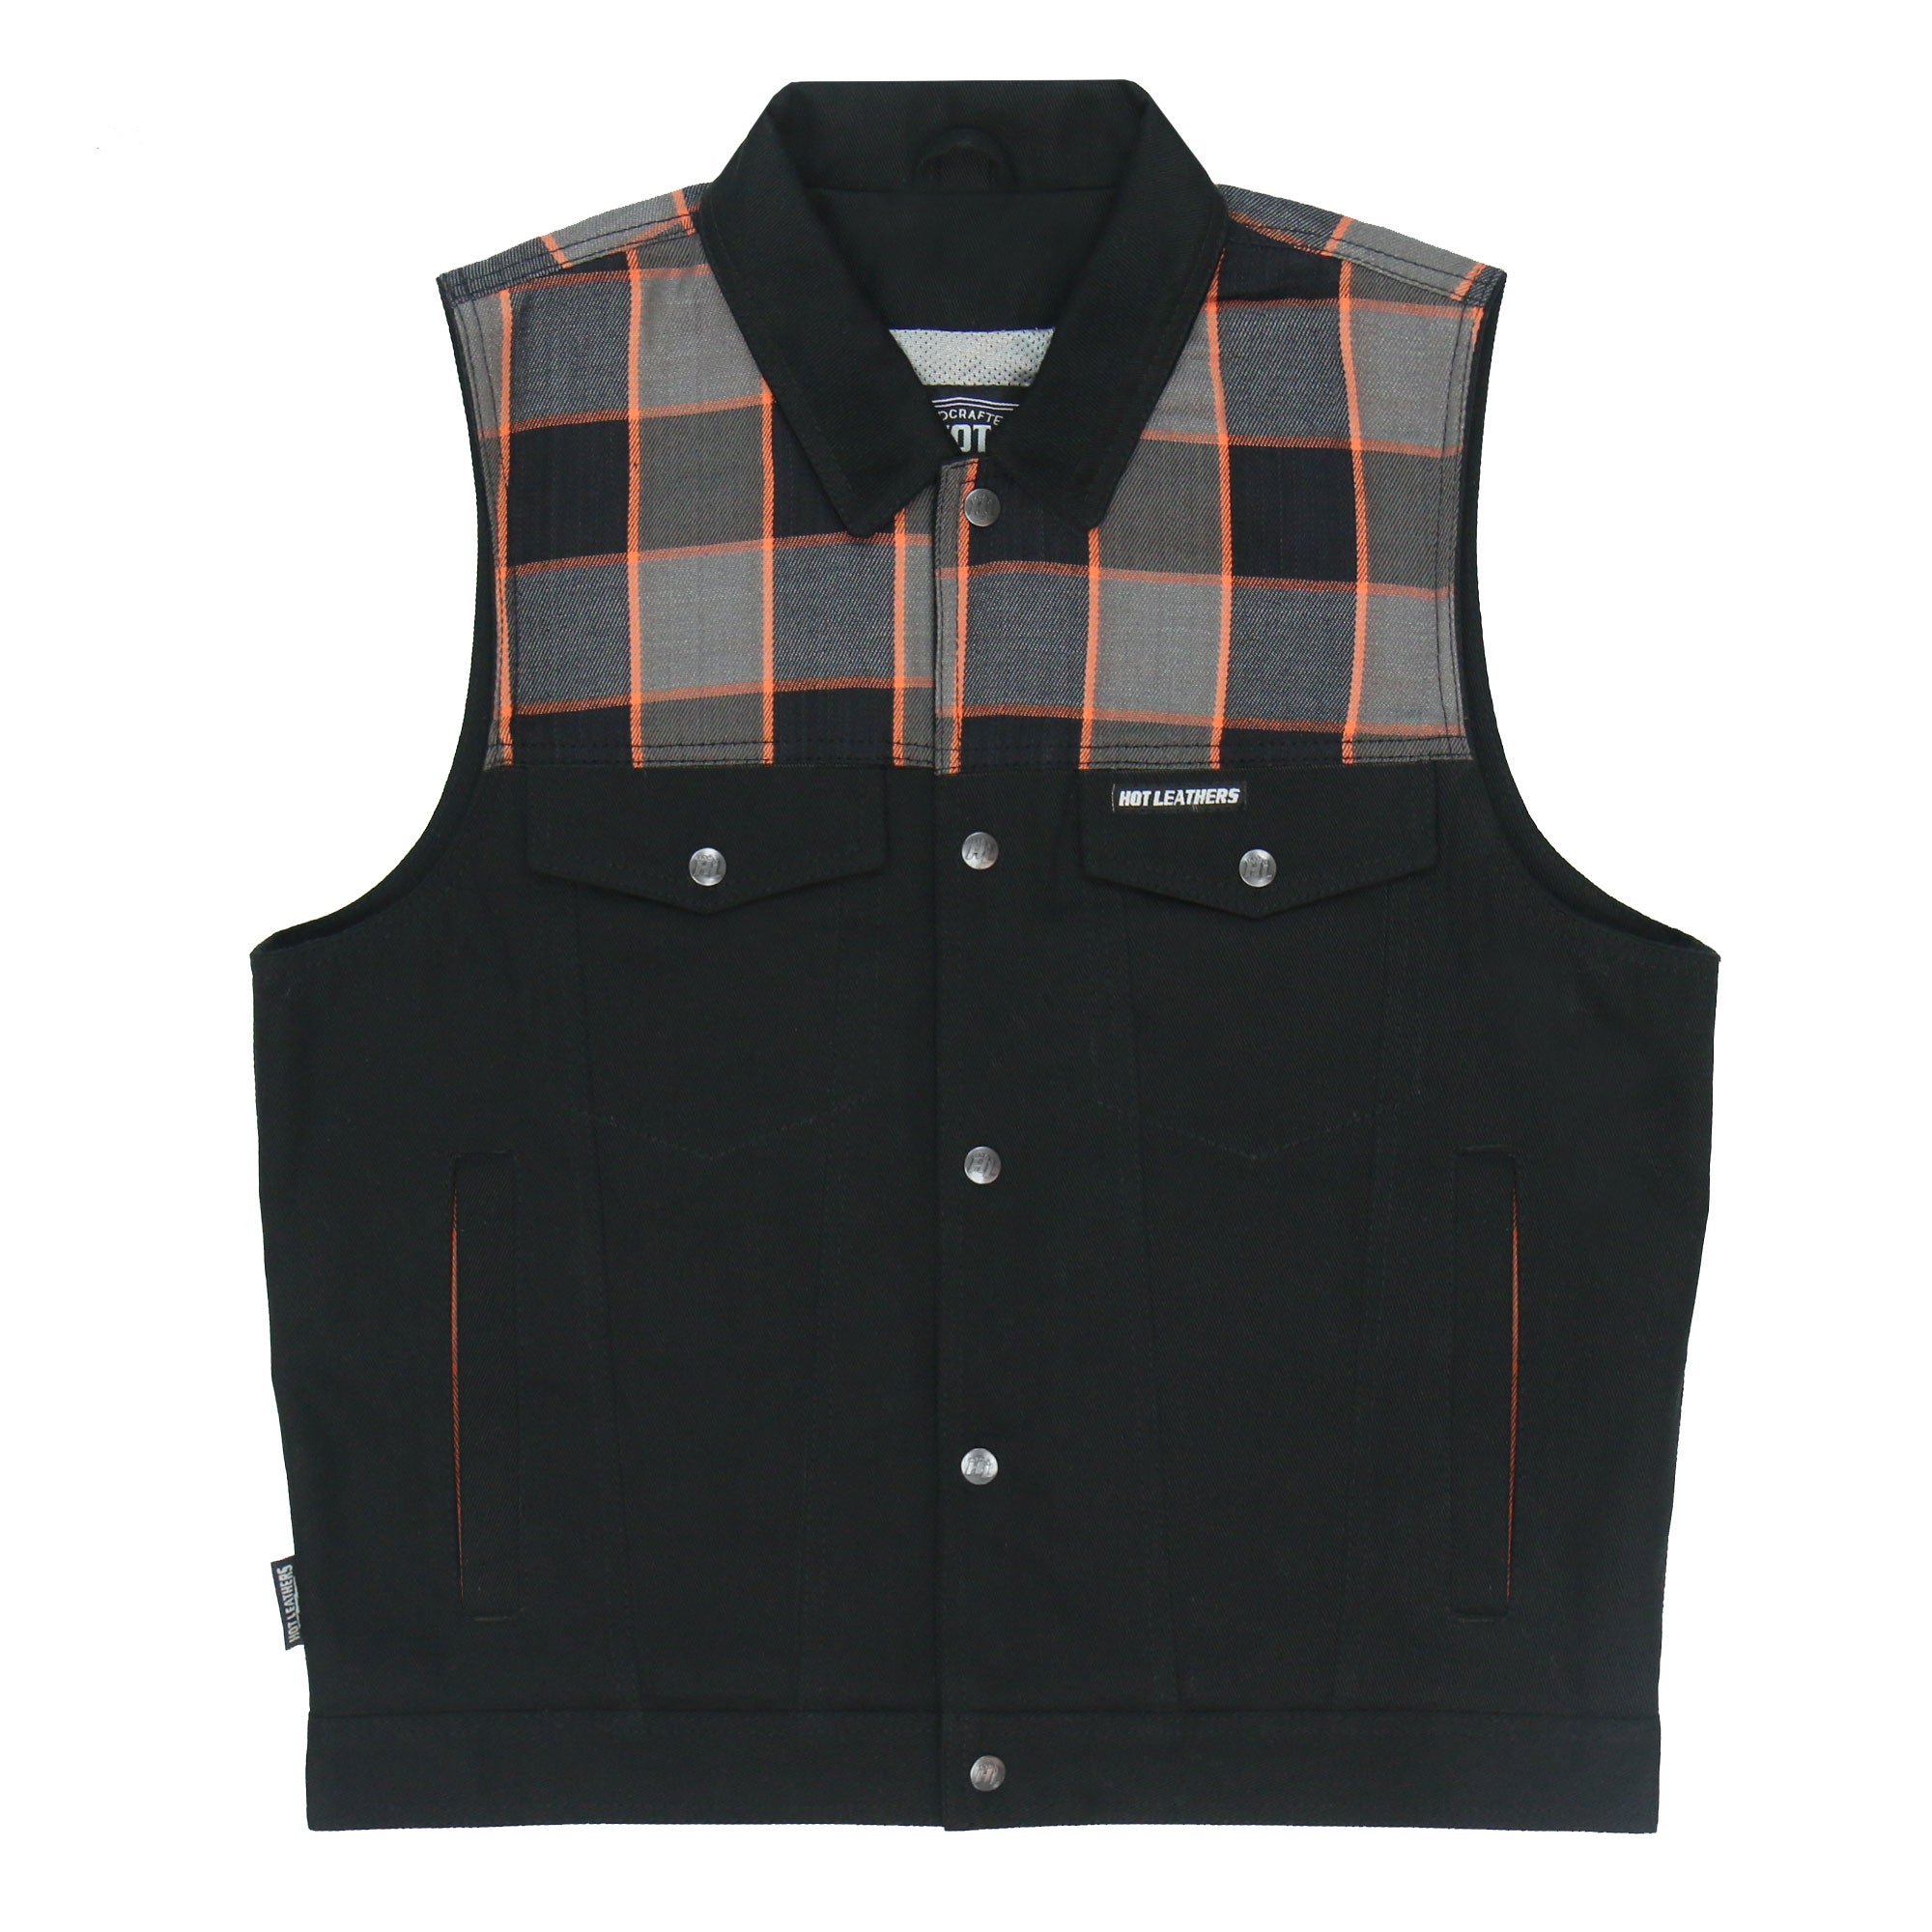 Hot Leathers Men’s Denim and Flannel Conceal Carry Vest